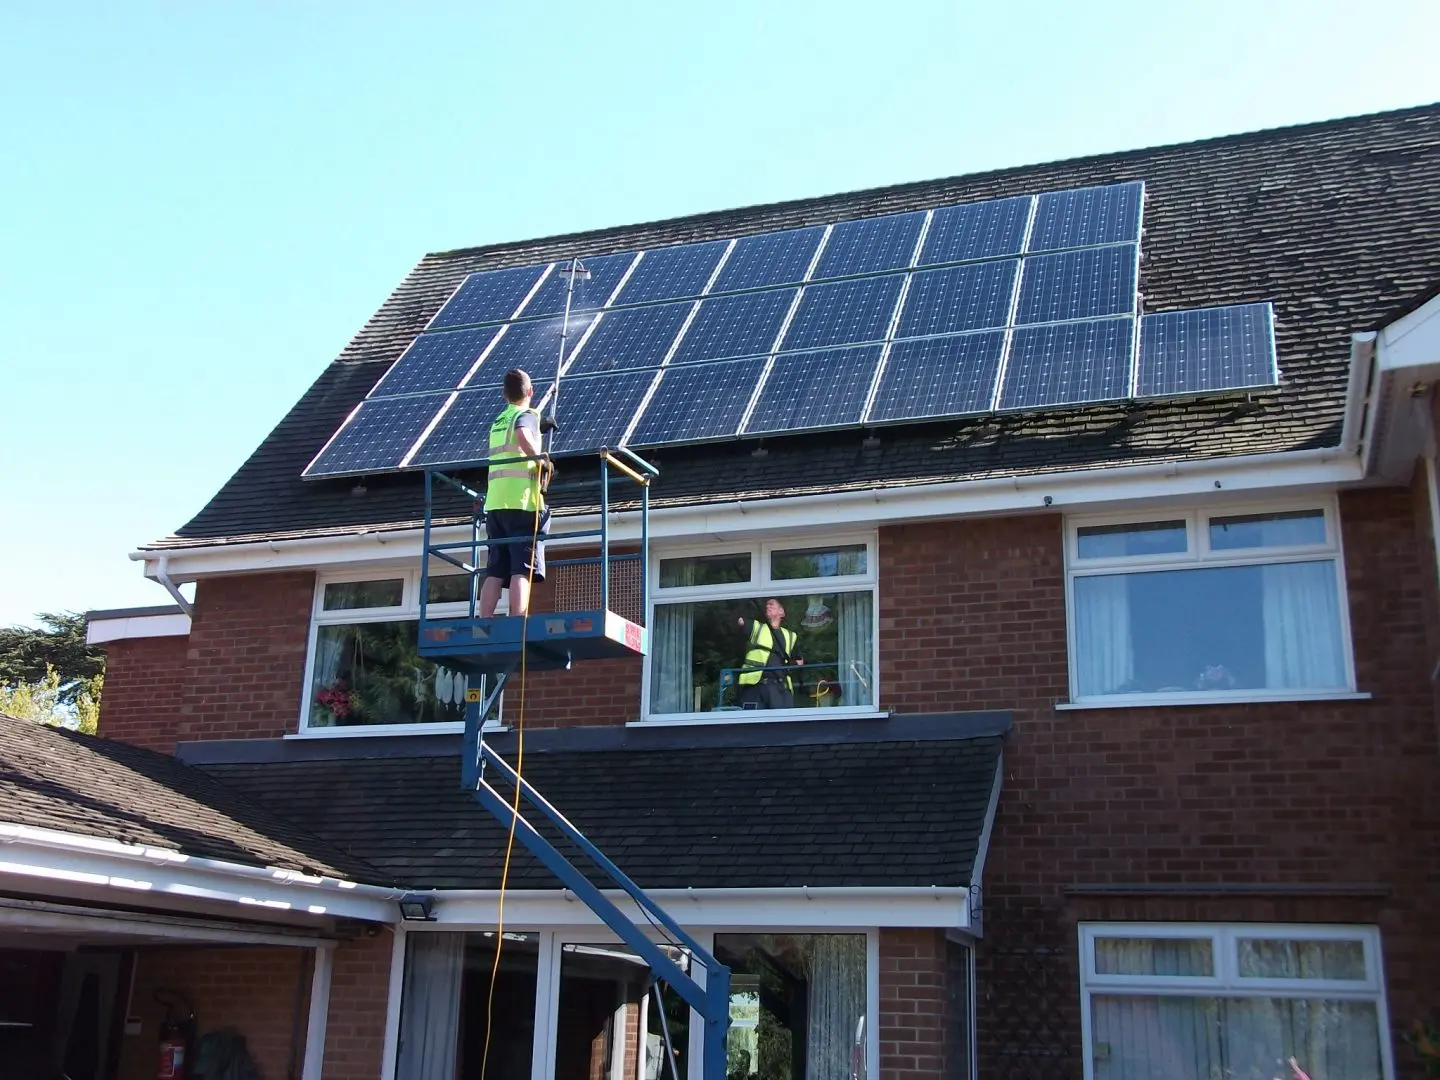 cleaning solar panels uk - Is it worth cleaning solar panels UK